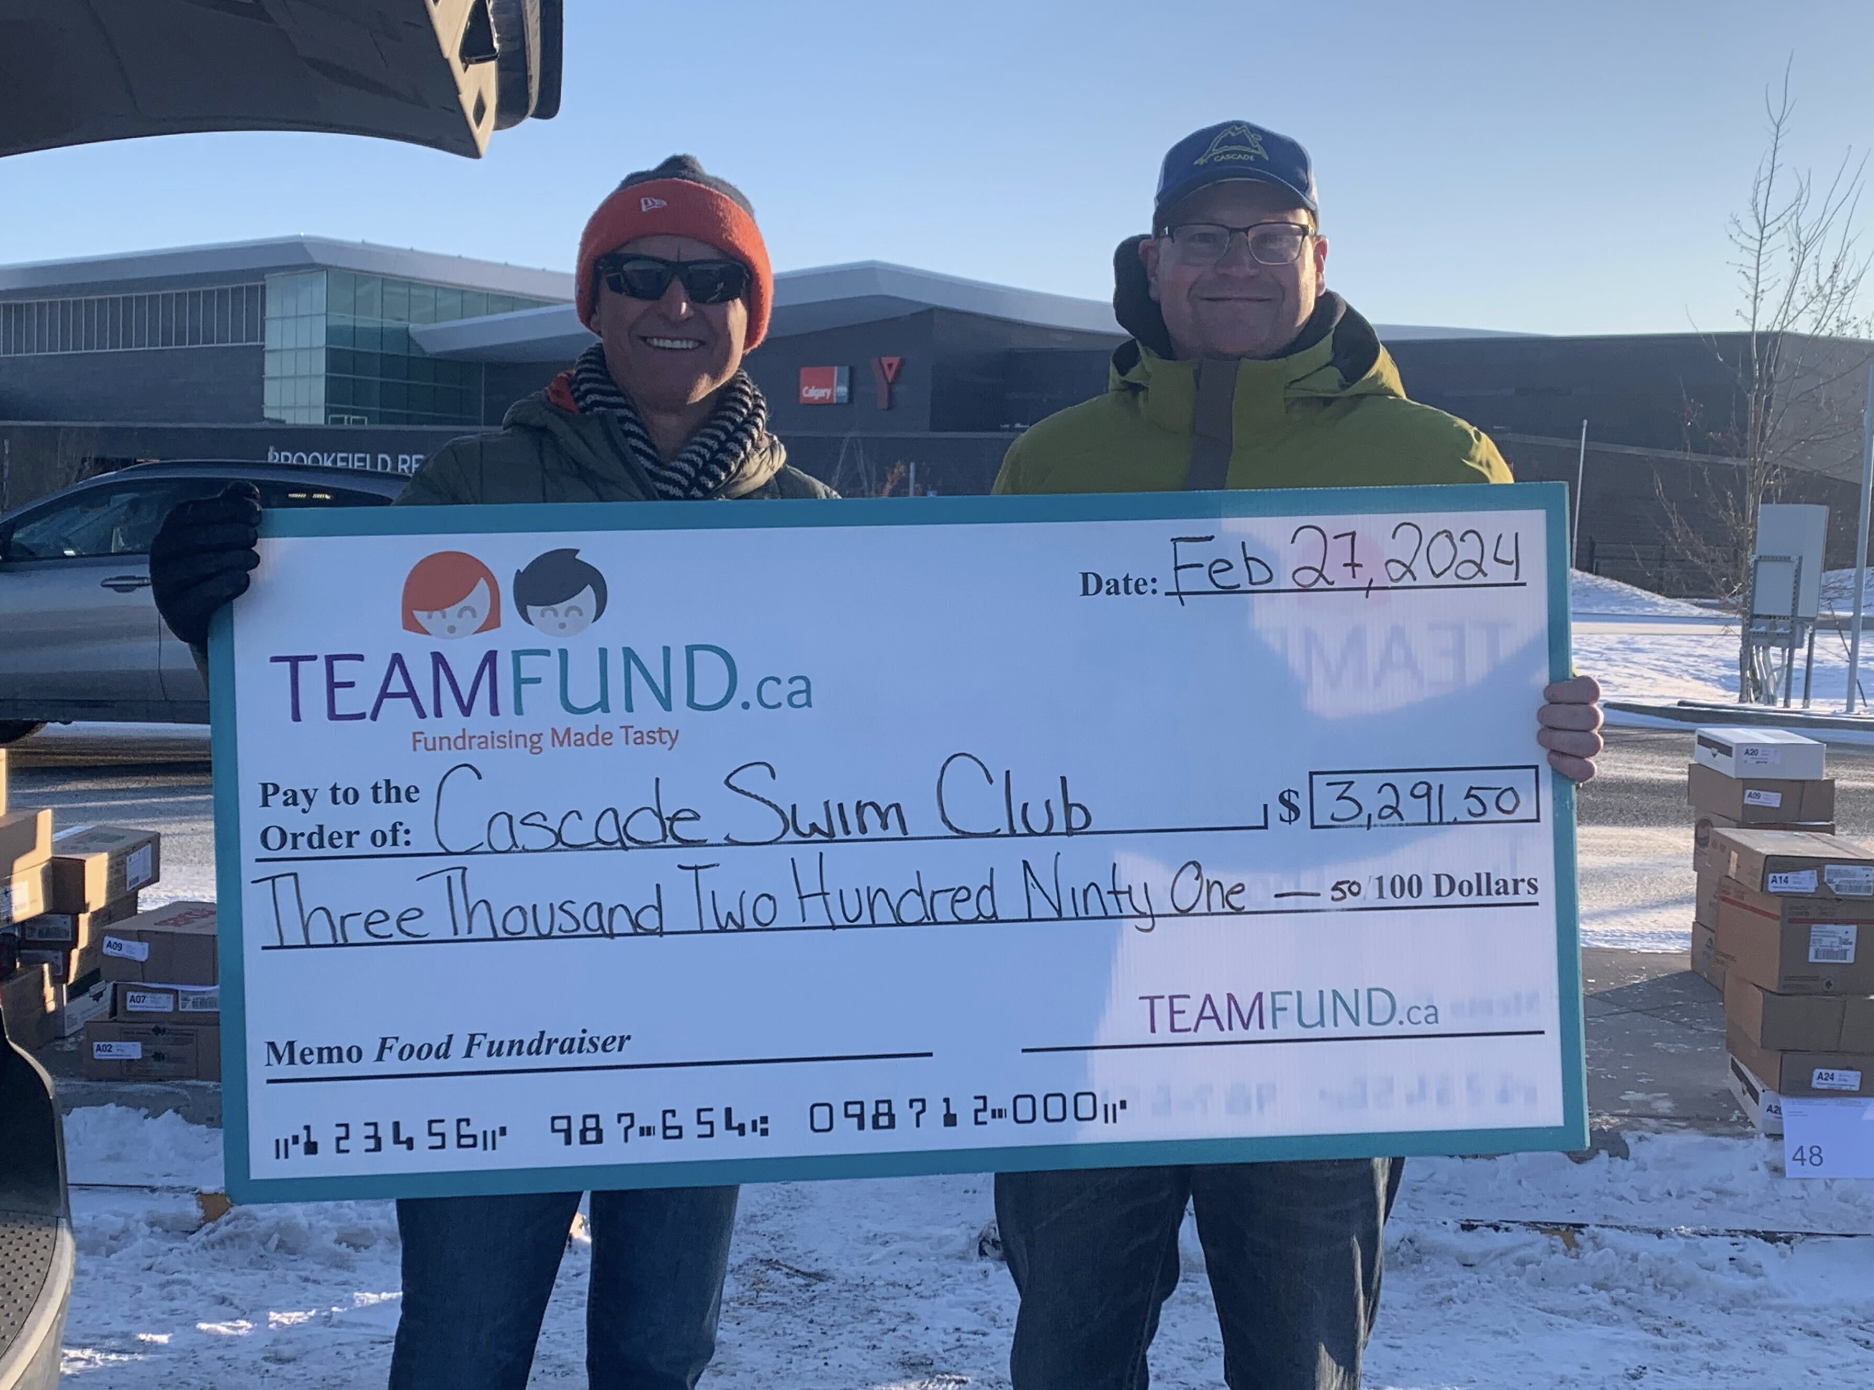 University of Calgary Swim Club raised $6455 in their Fall 2023 meat fundraising campaign with TeamFund.